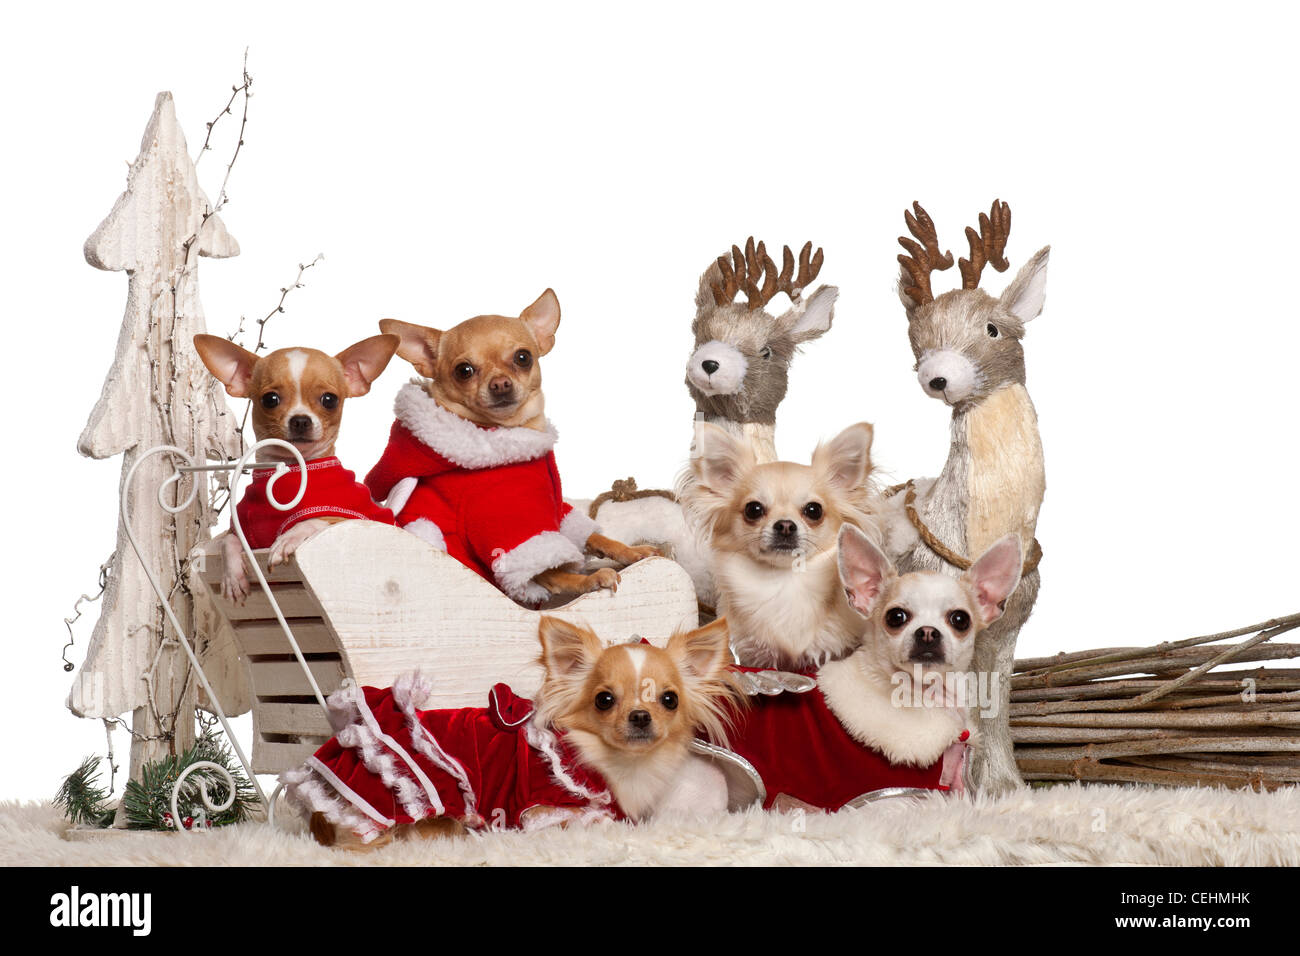 Chihuahuas in Christmas sleigh in front of white background Stock Photo